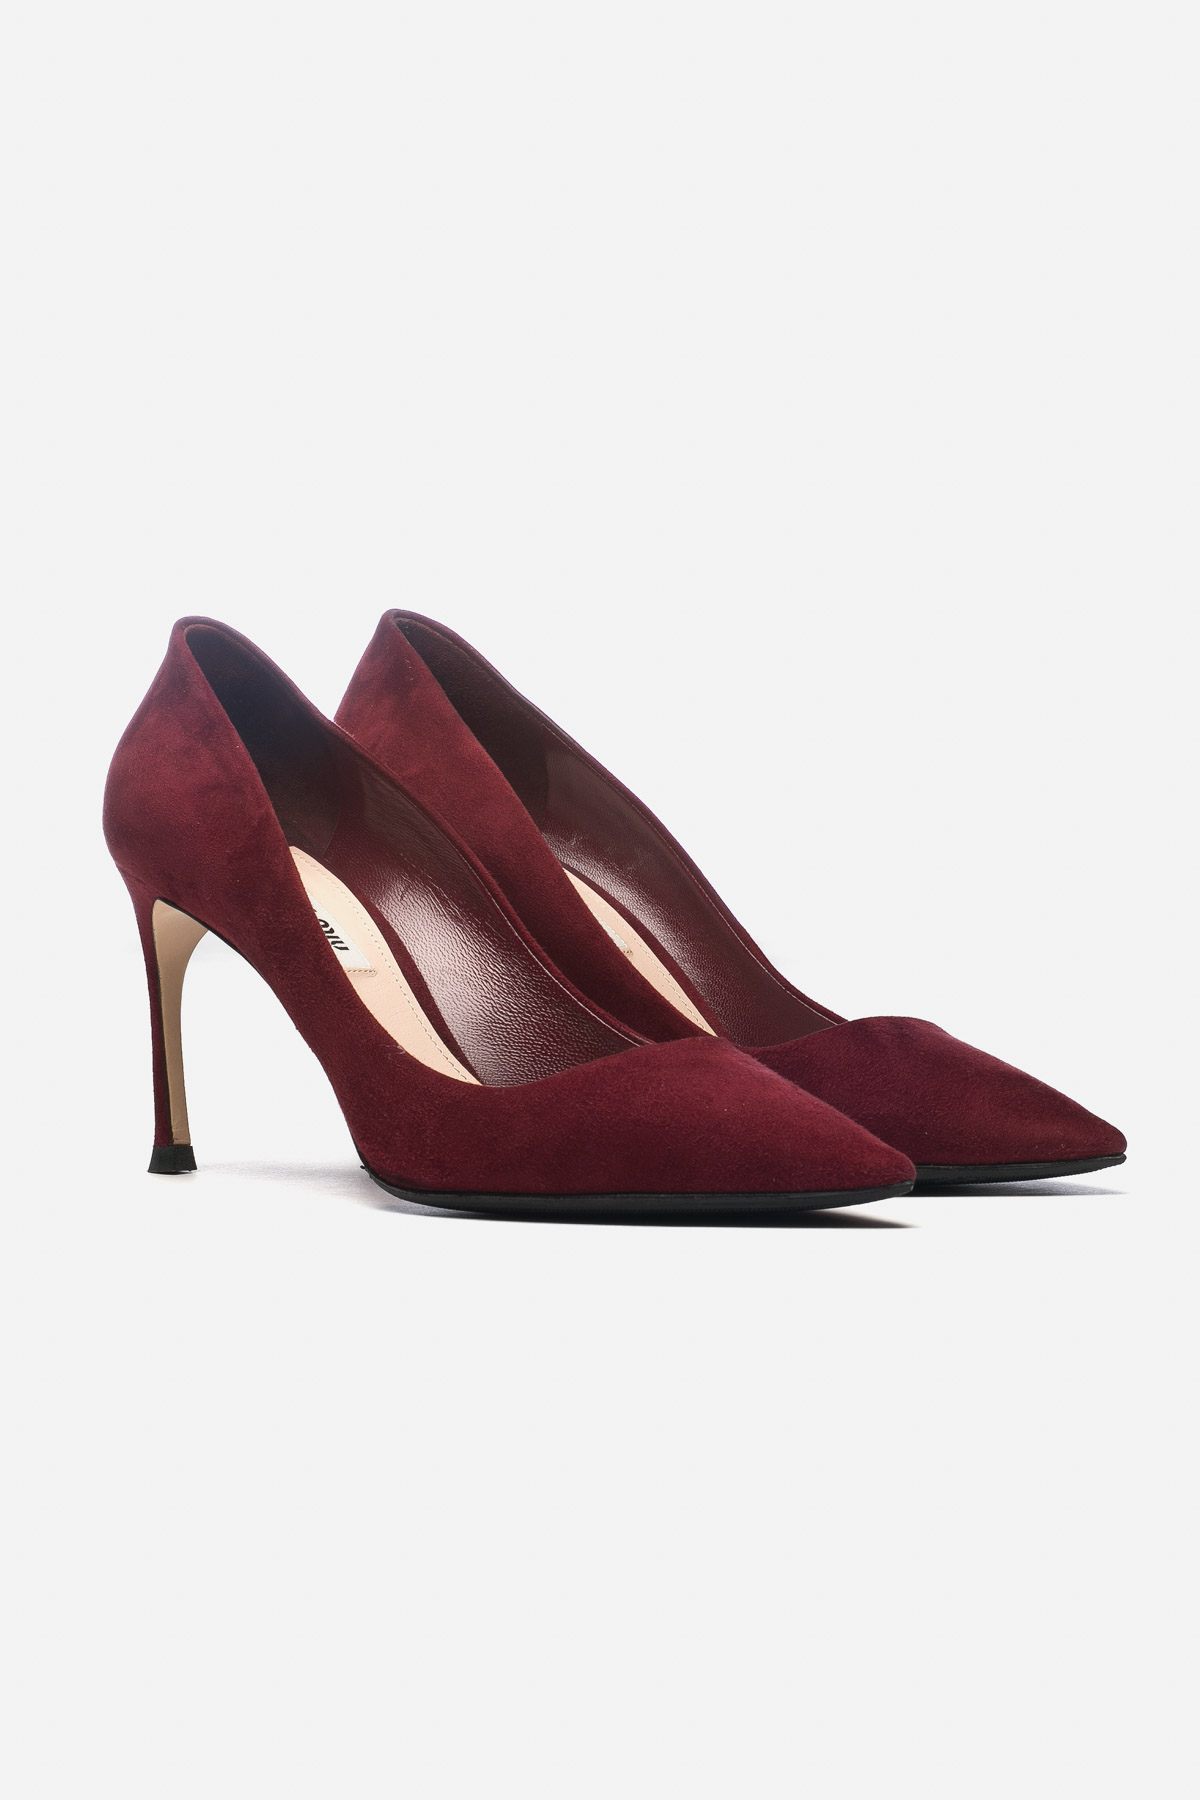 SUEDE POINTED-TOE PUMPS